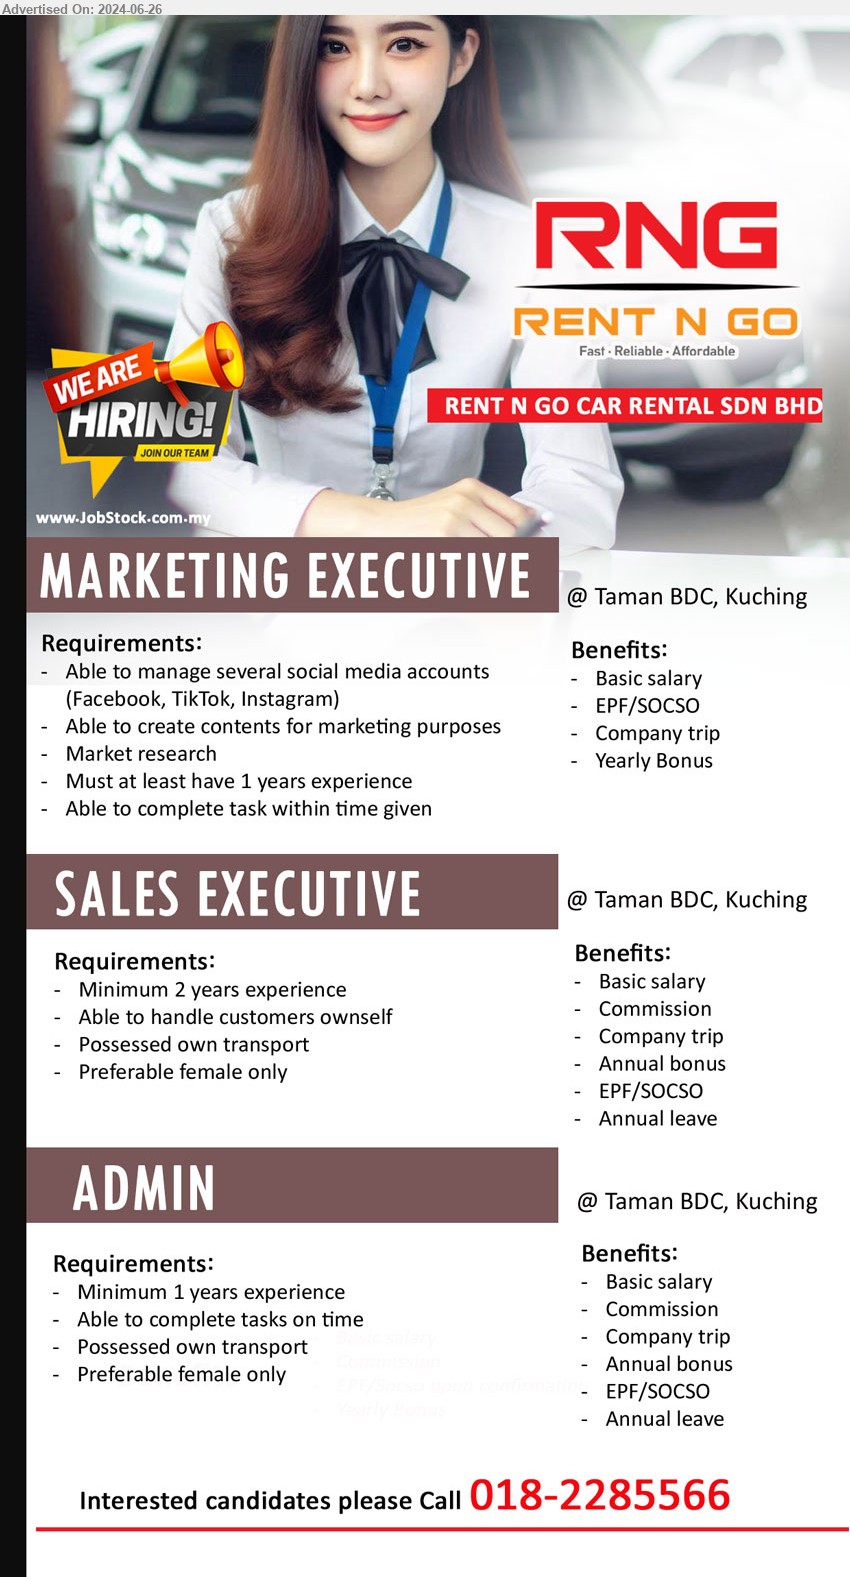 RENT N GO CAR RENTAL SDN BHD - 1. MARKETING EXECUTIVE (Kuching), Able to manage several social media accounts (Facebook, TikTok, Instagram), 1 yr. exp.,...
2. SALES EXECUTIVE (Kuching), Preferable female only, 2 yrs. exp., Able to handle customers ownself,...
3. ADMIN (Kuching), Preferable female only, 1 yr. exp.,...
Interested candidates please Call 018-2285566